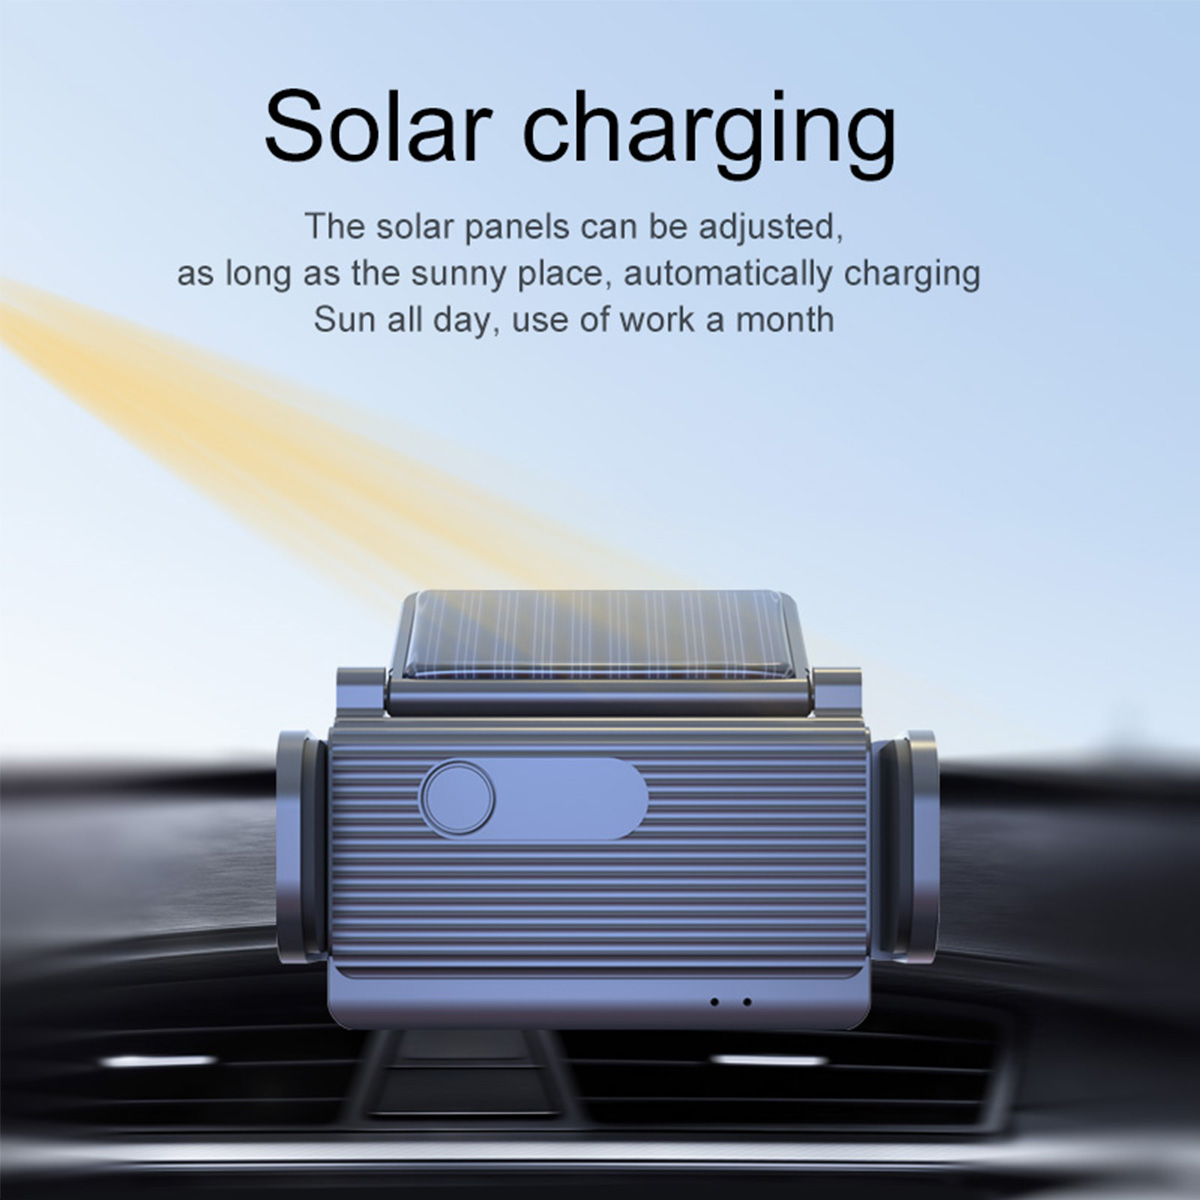 Bakeey H30 Car Solar Powered Auto-Induction Vehicle Bracket Mobile Phone Holder Stand for POCO X3 F3 4.5-6.9 inch Devices